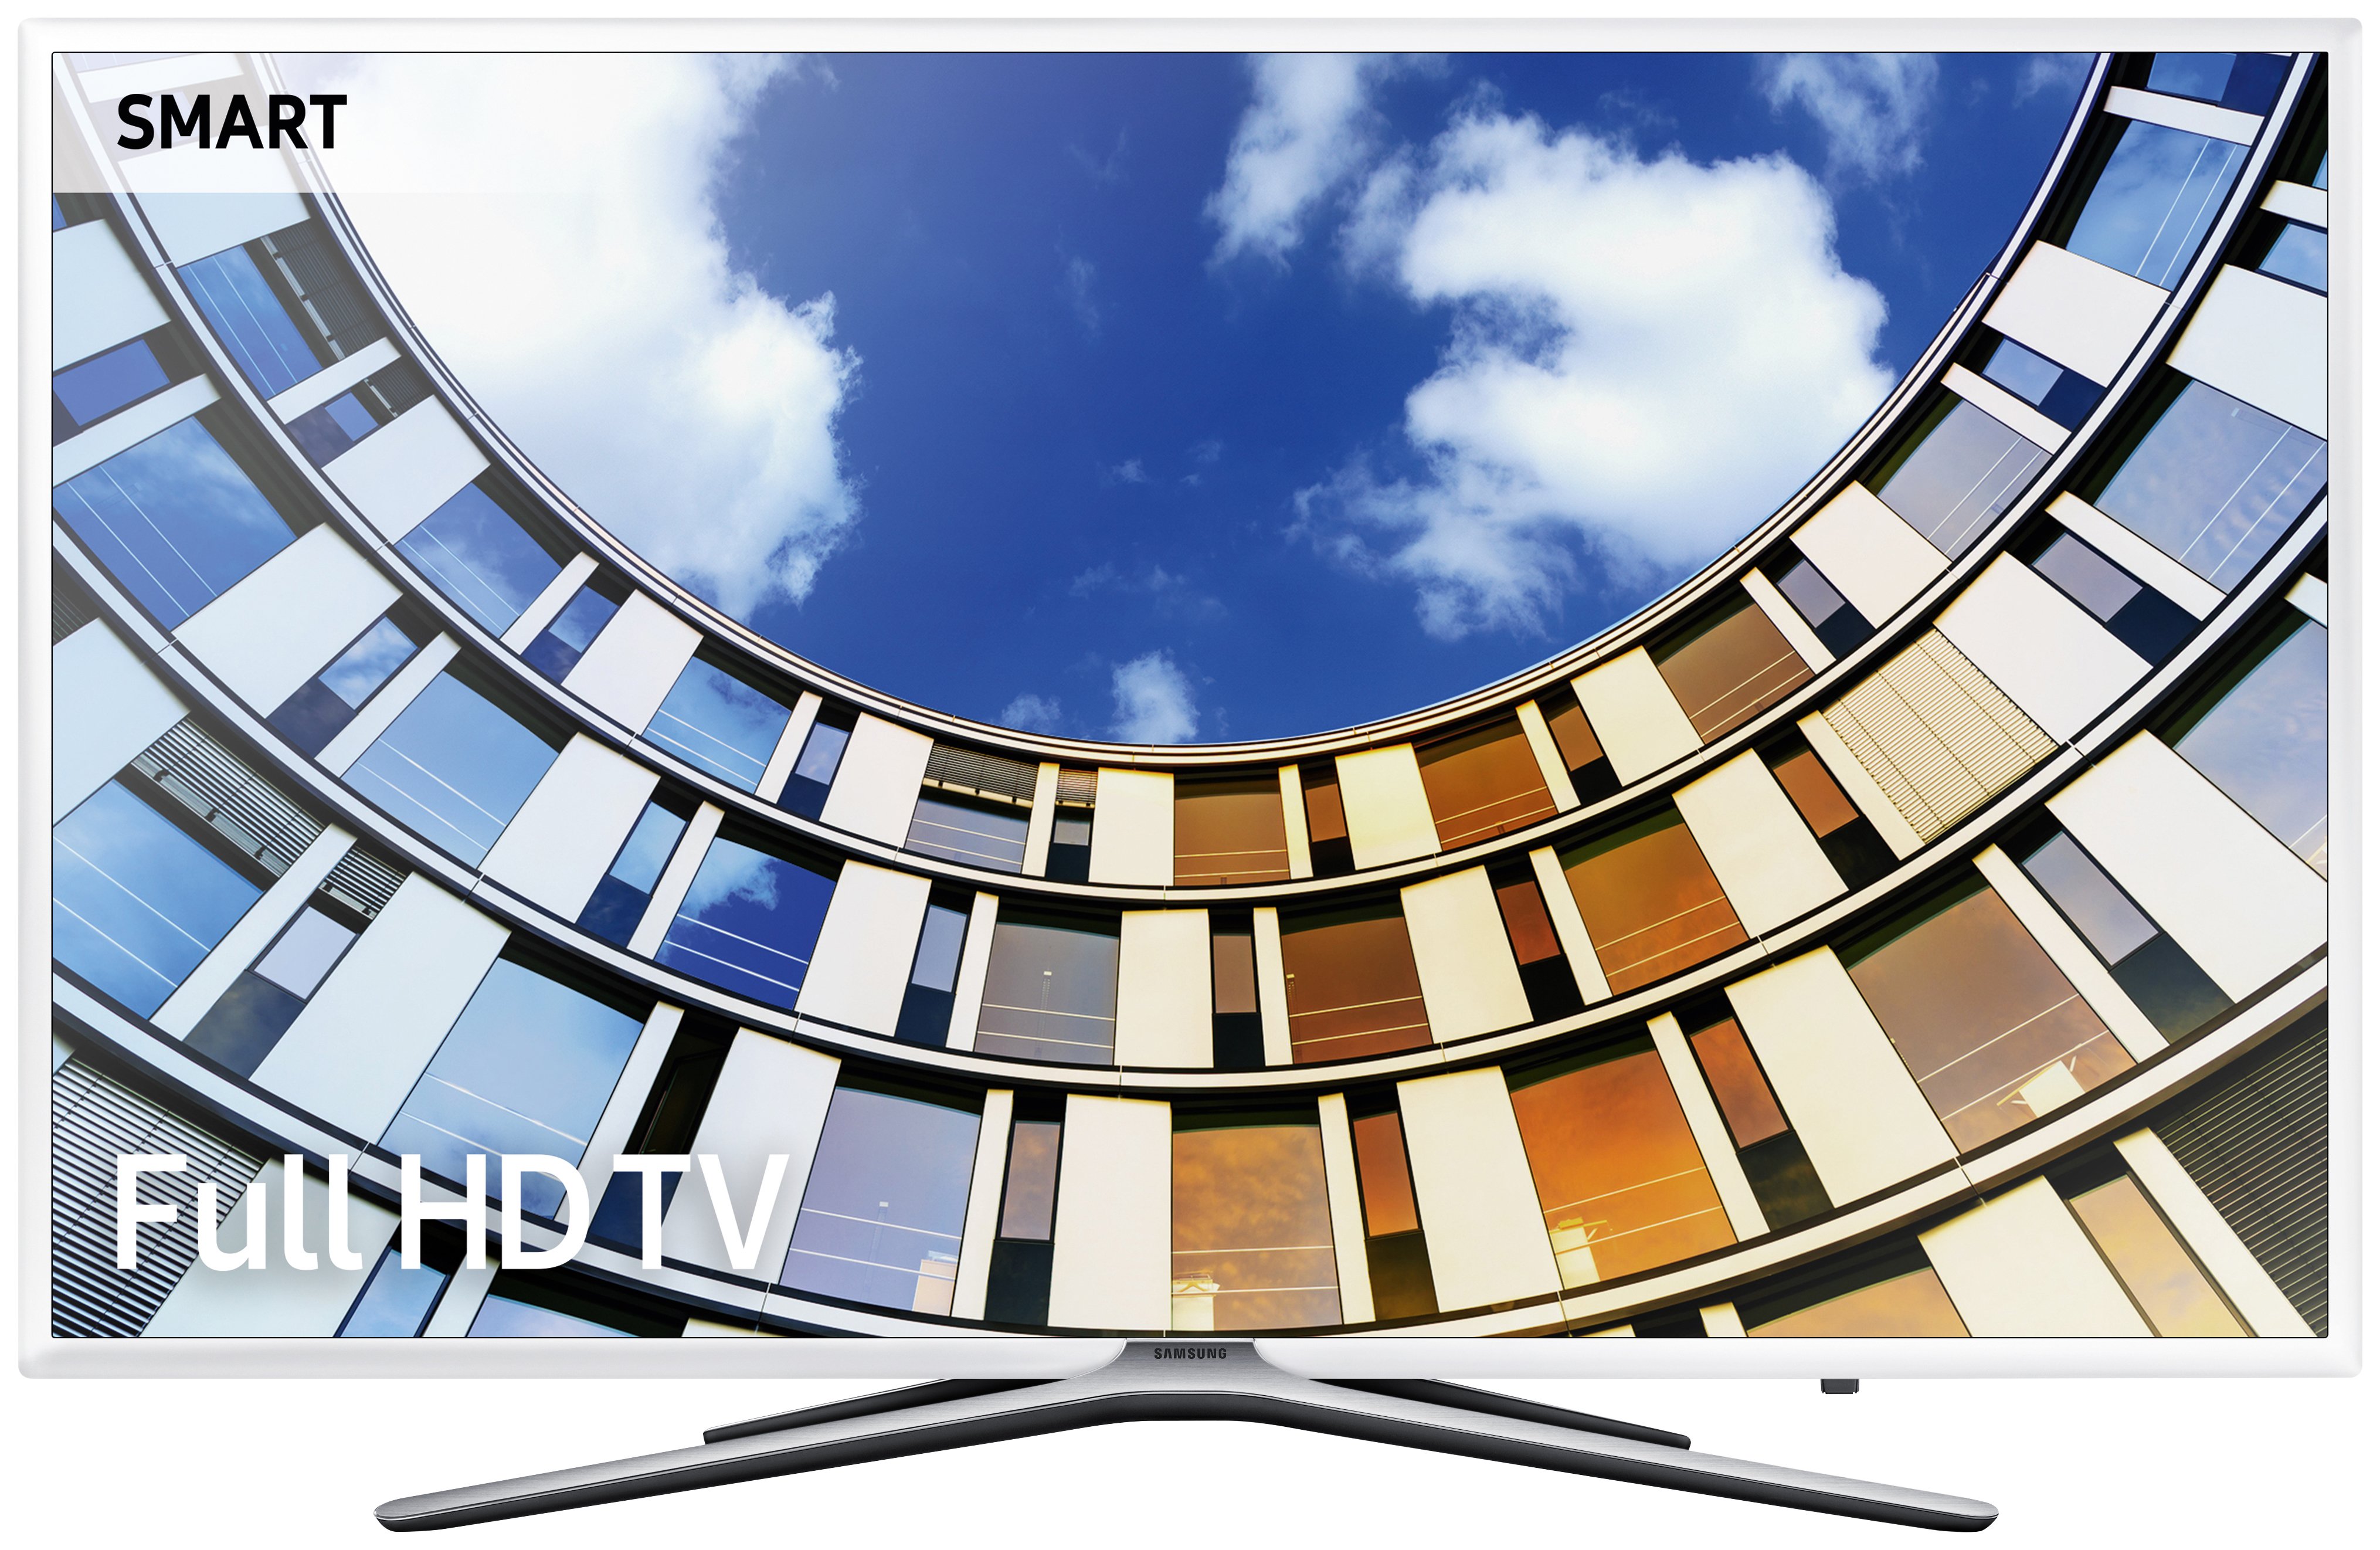 Samsung M5510 49 Inch Smart Full HD TV. Review